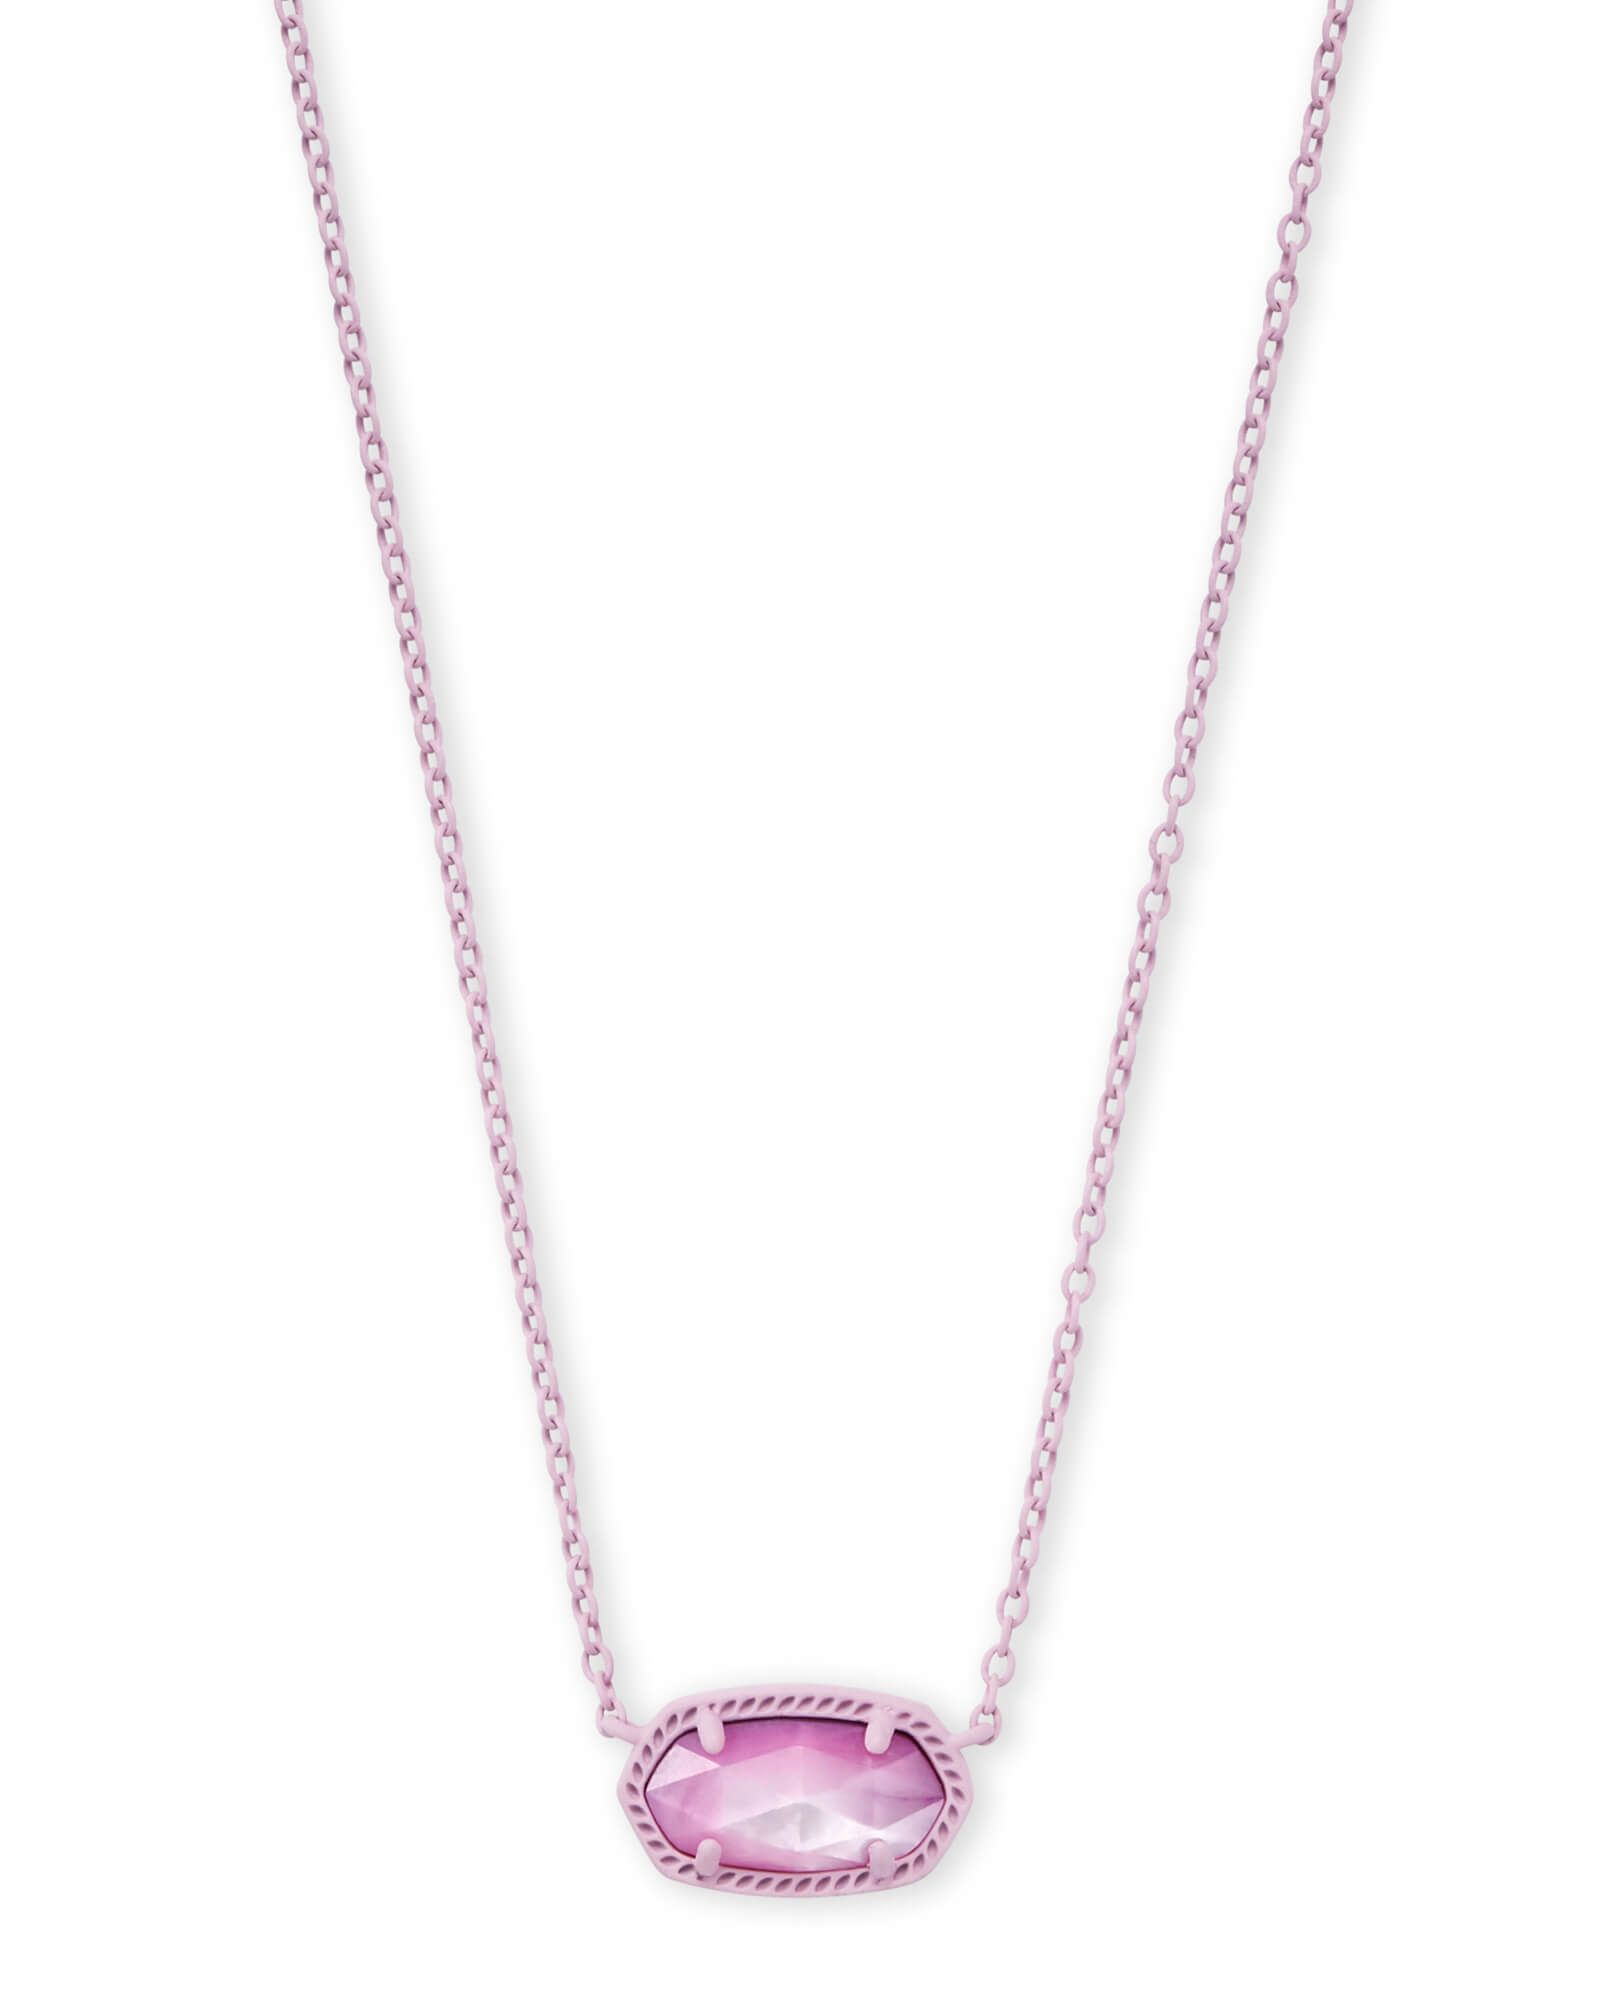 Elisa Matte Necklace in Lilac Mother of Pearl | Kendra Scott